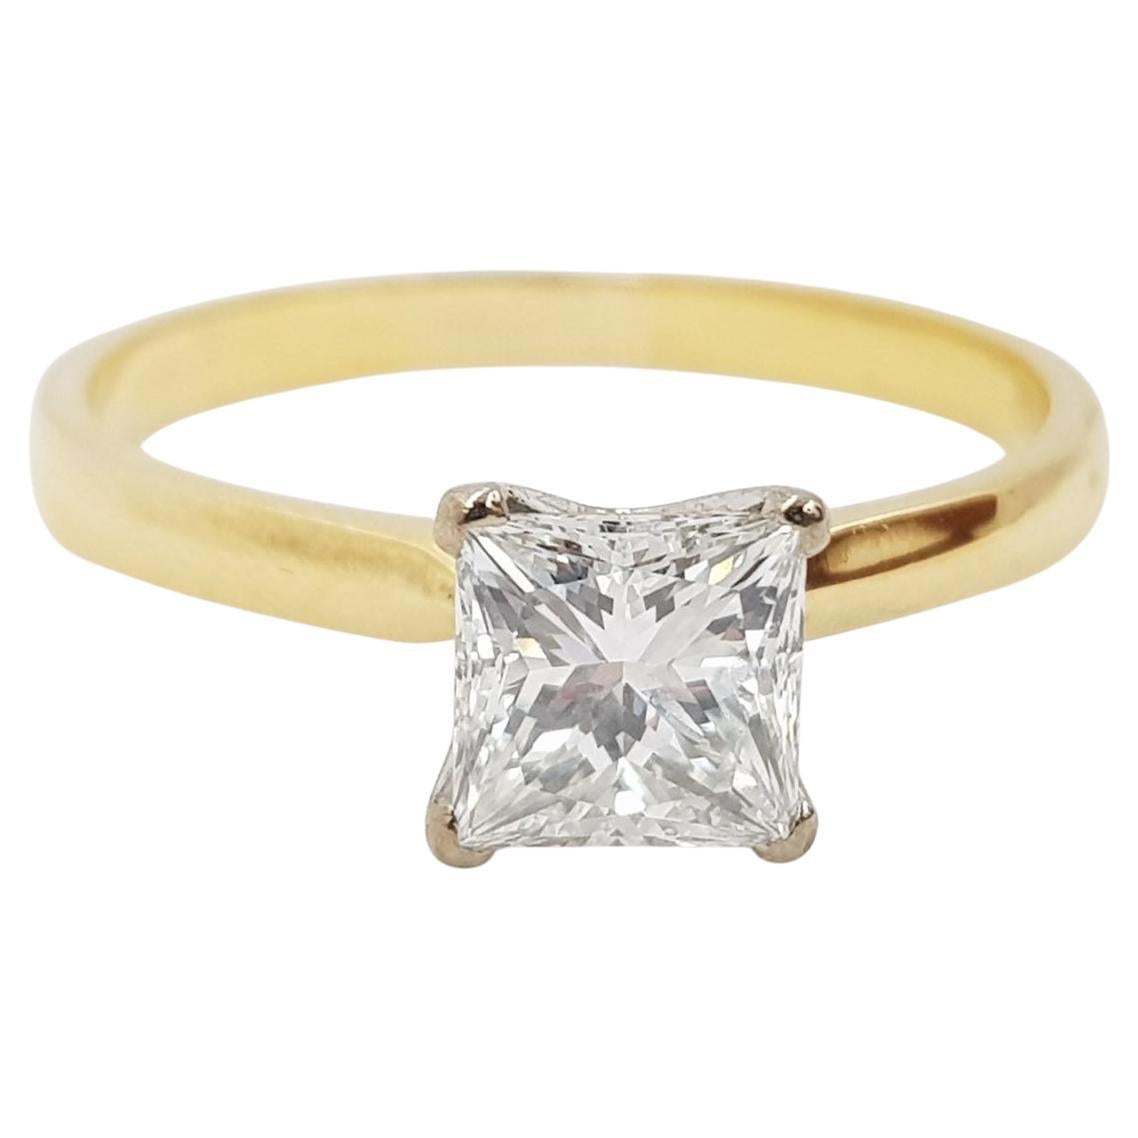 18ct Gold 1.23ct Princess Cut Solitaire Diamond Ring GIA Certified